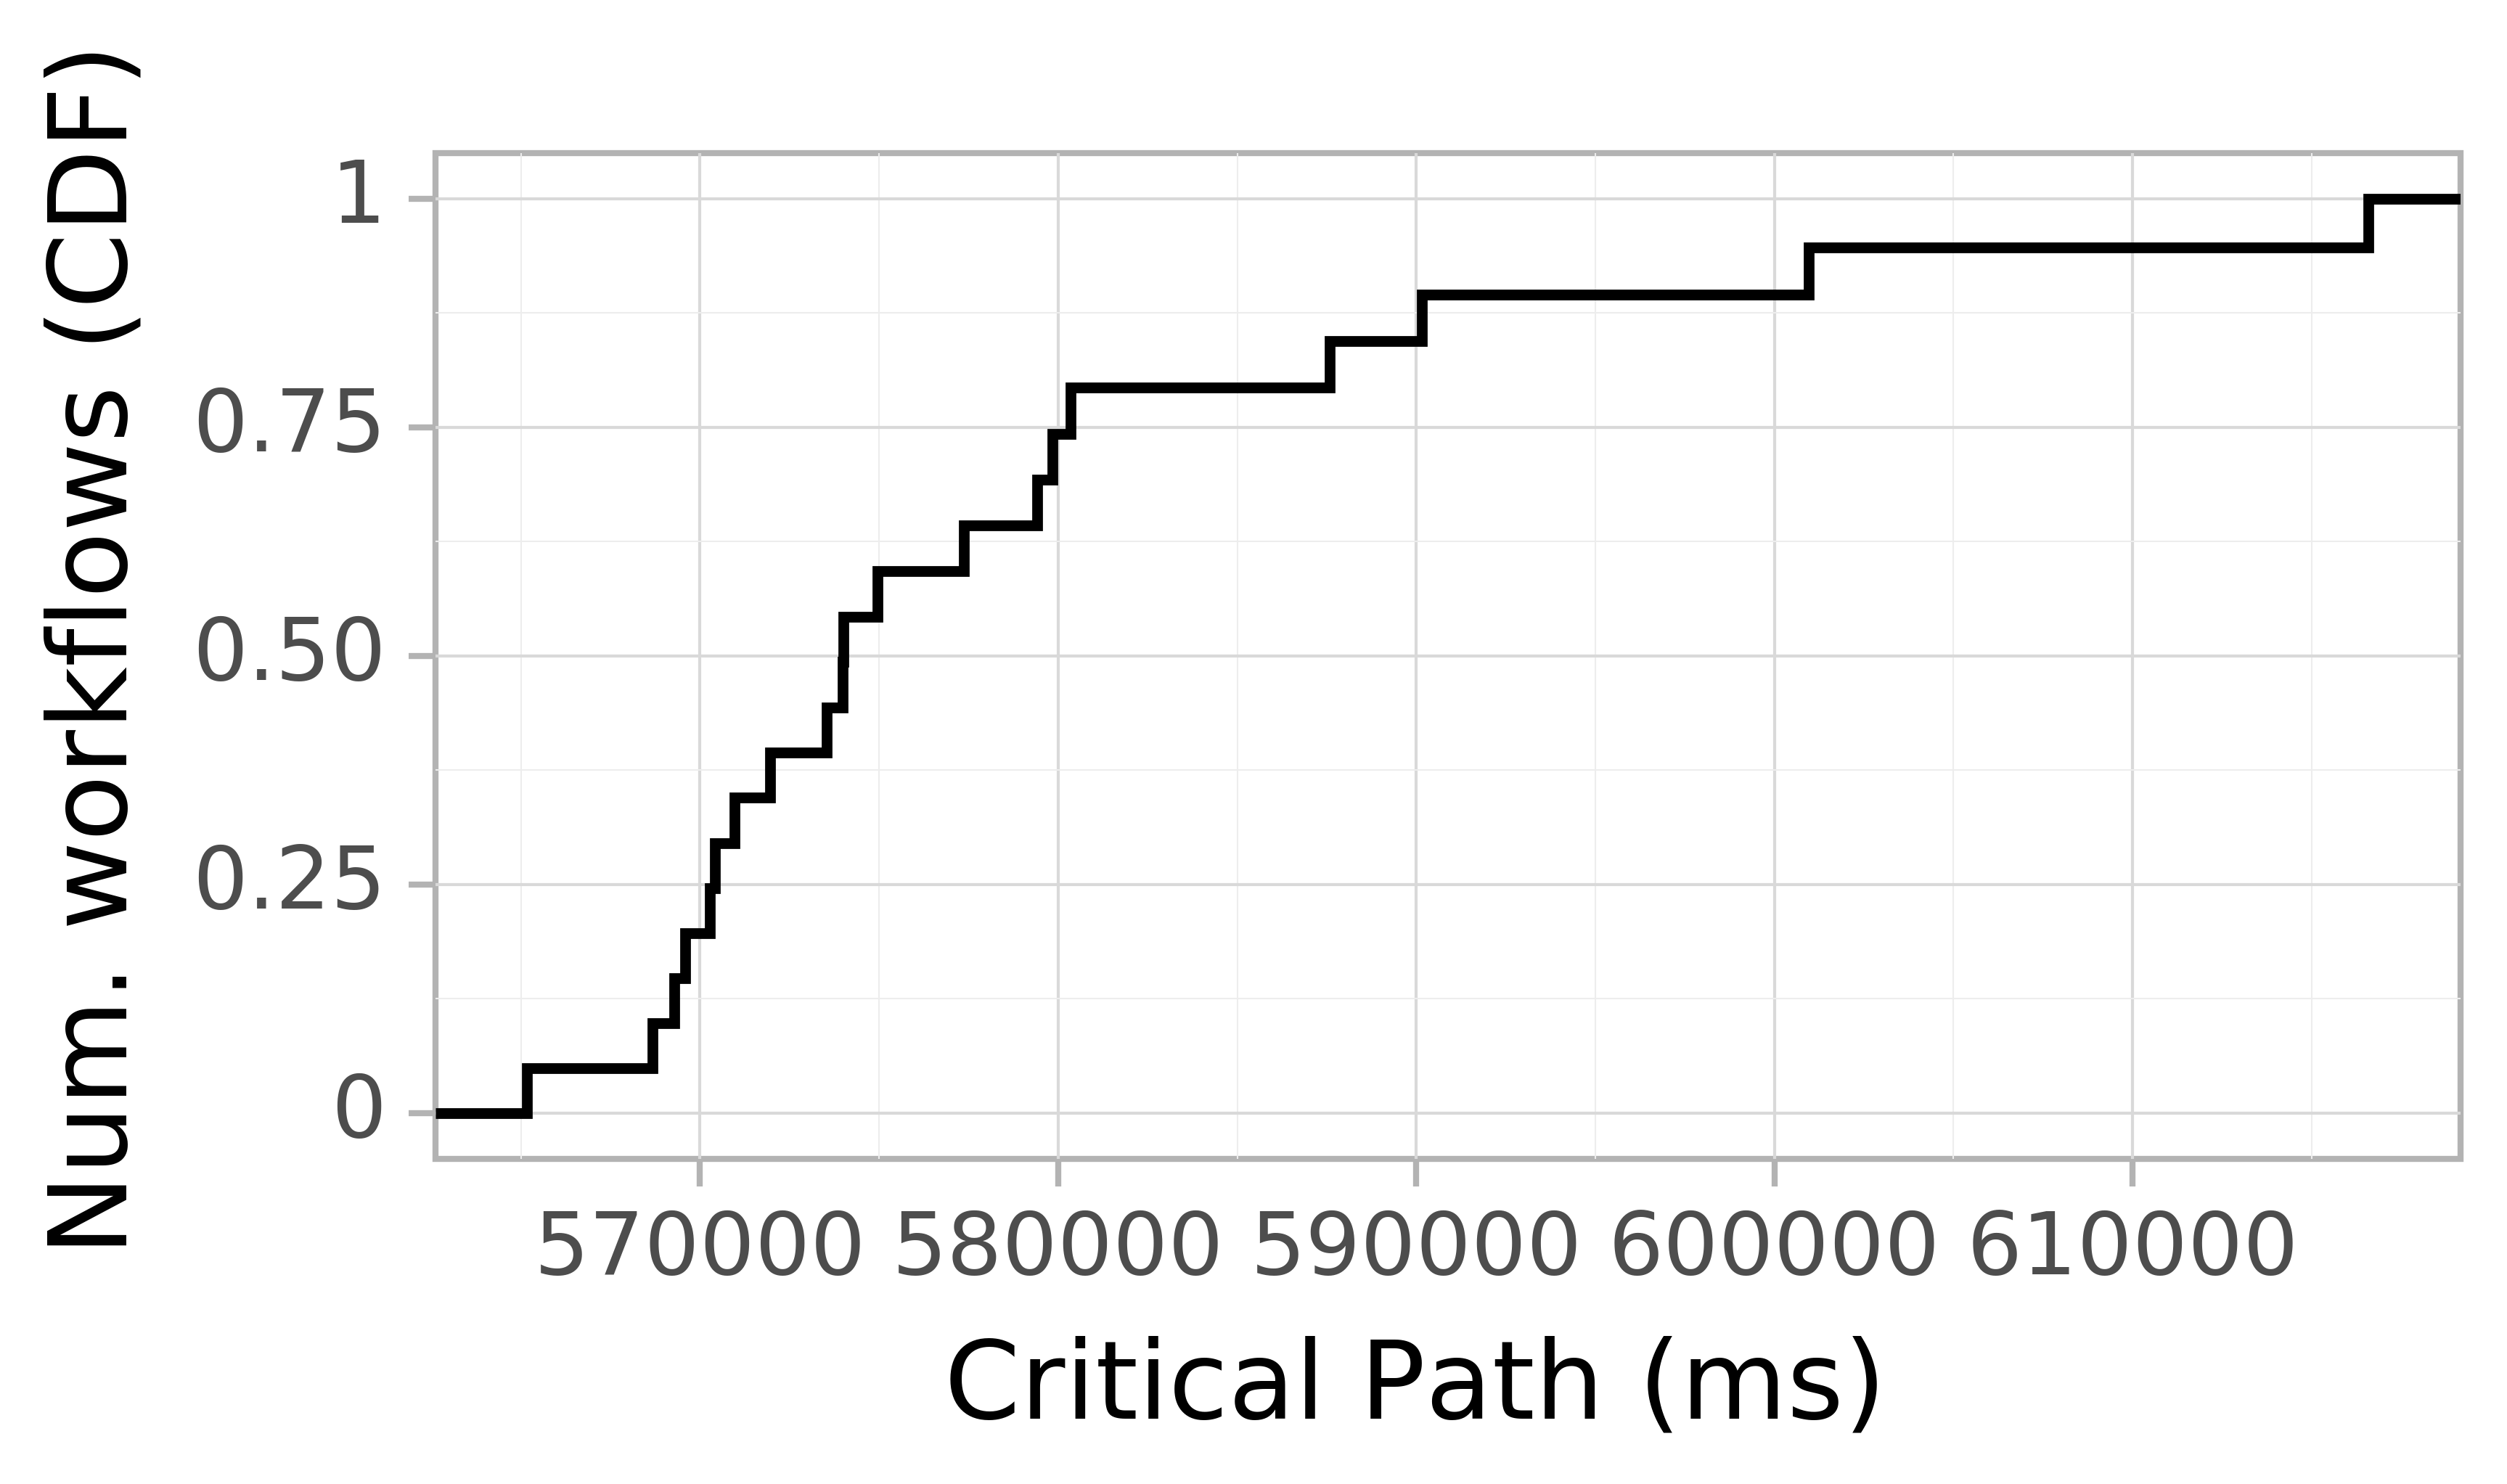 Job runtime CDF graph for the askalon-new_ee15 trace.